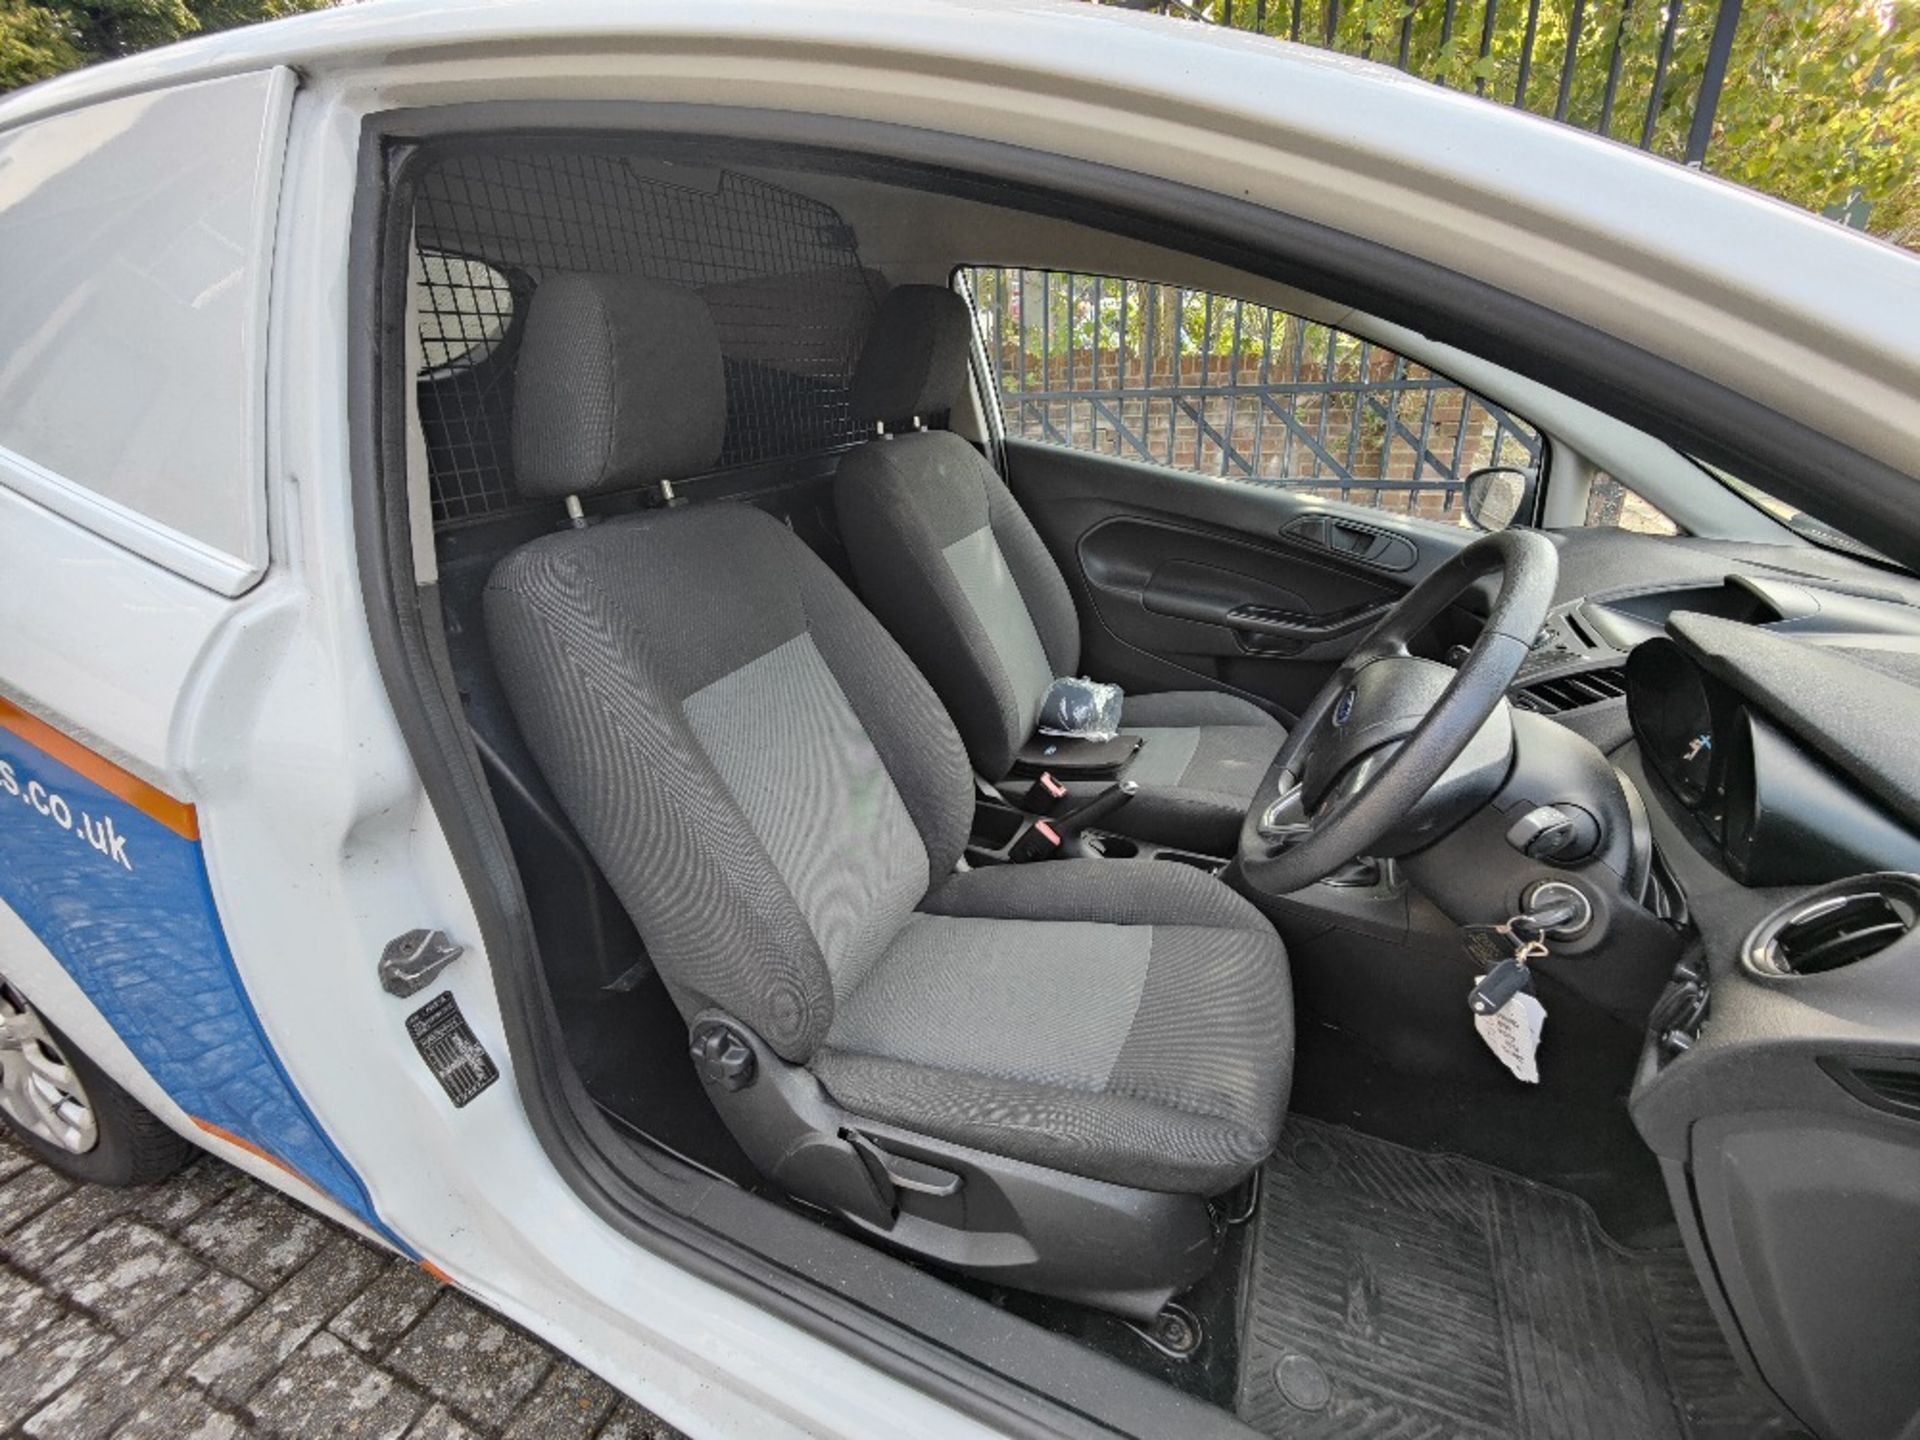 VN64 ZVS - Ford Fiesta BASE TDCI - Image 15 of 18